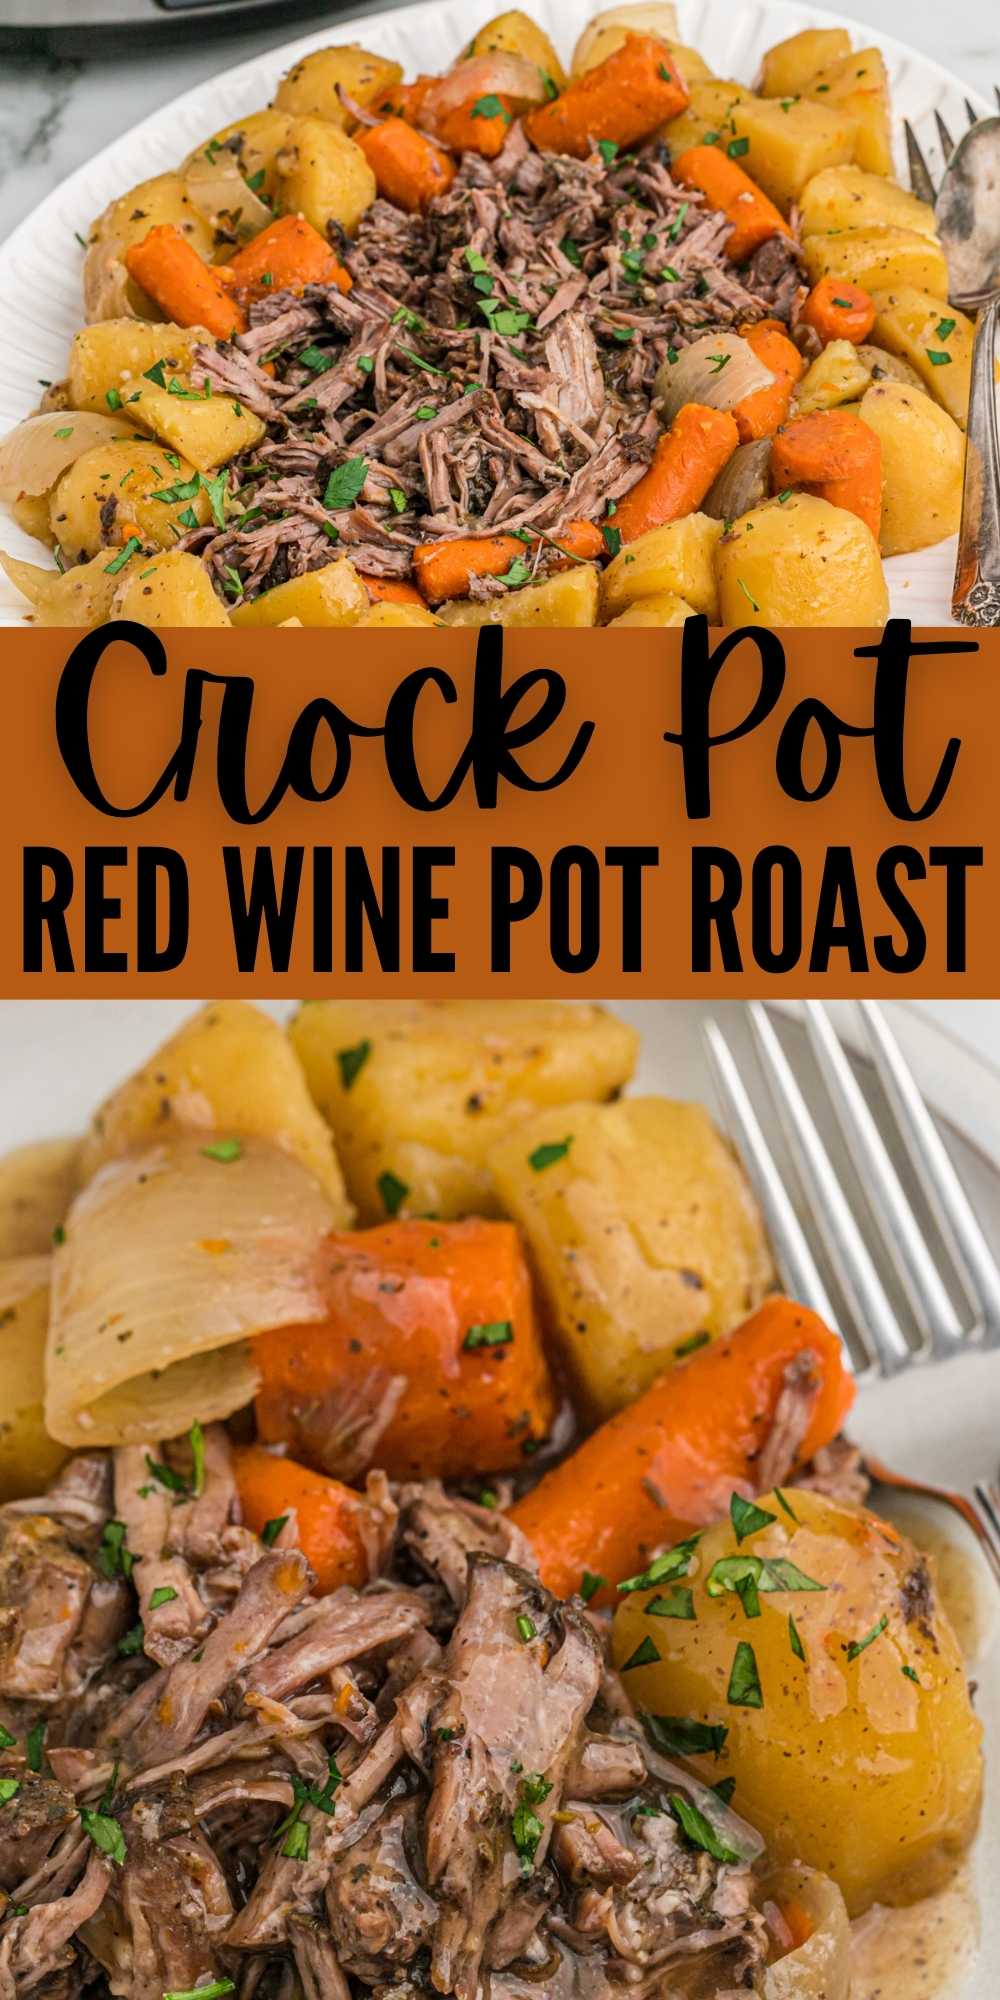 This Slow Cooker Red Wine Pot Roast is full of warm flavors. Easy seasoning make this recipe so juicy and moist that it melts in your mouth. Making this Red Wine Pot Roast in the slow cooker for delicious and easy meal. #eatingonadime #redwinepotroast #slowcooker